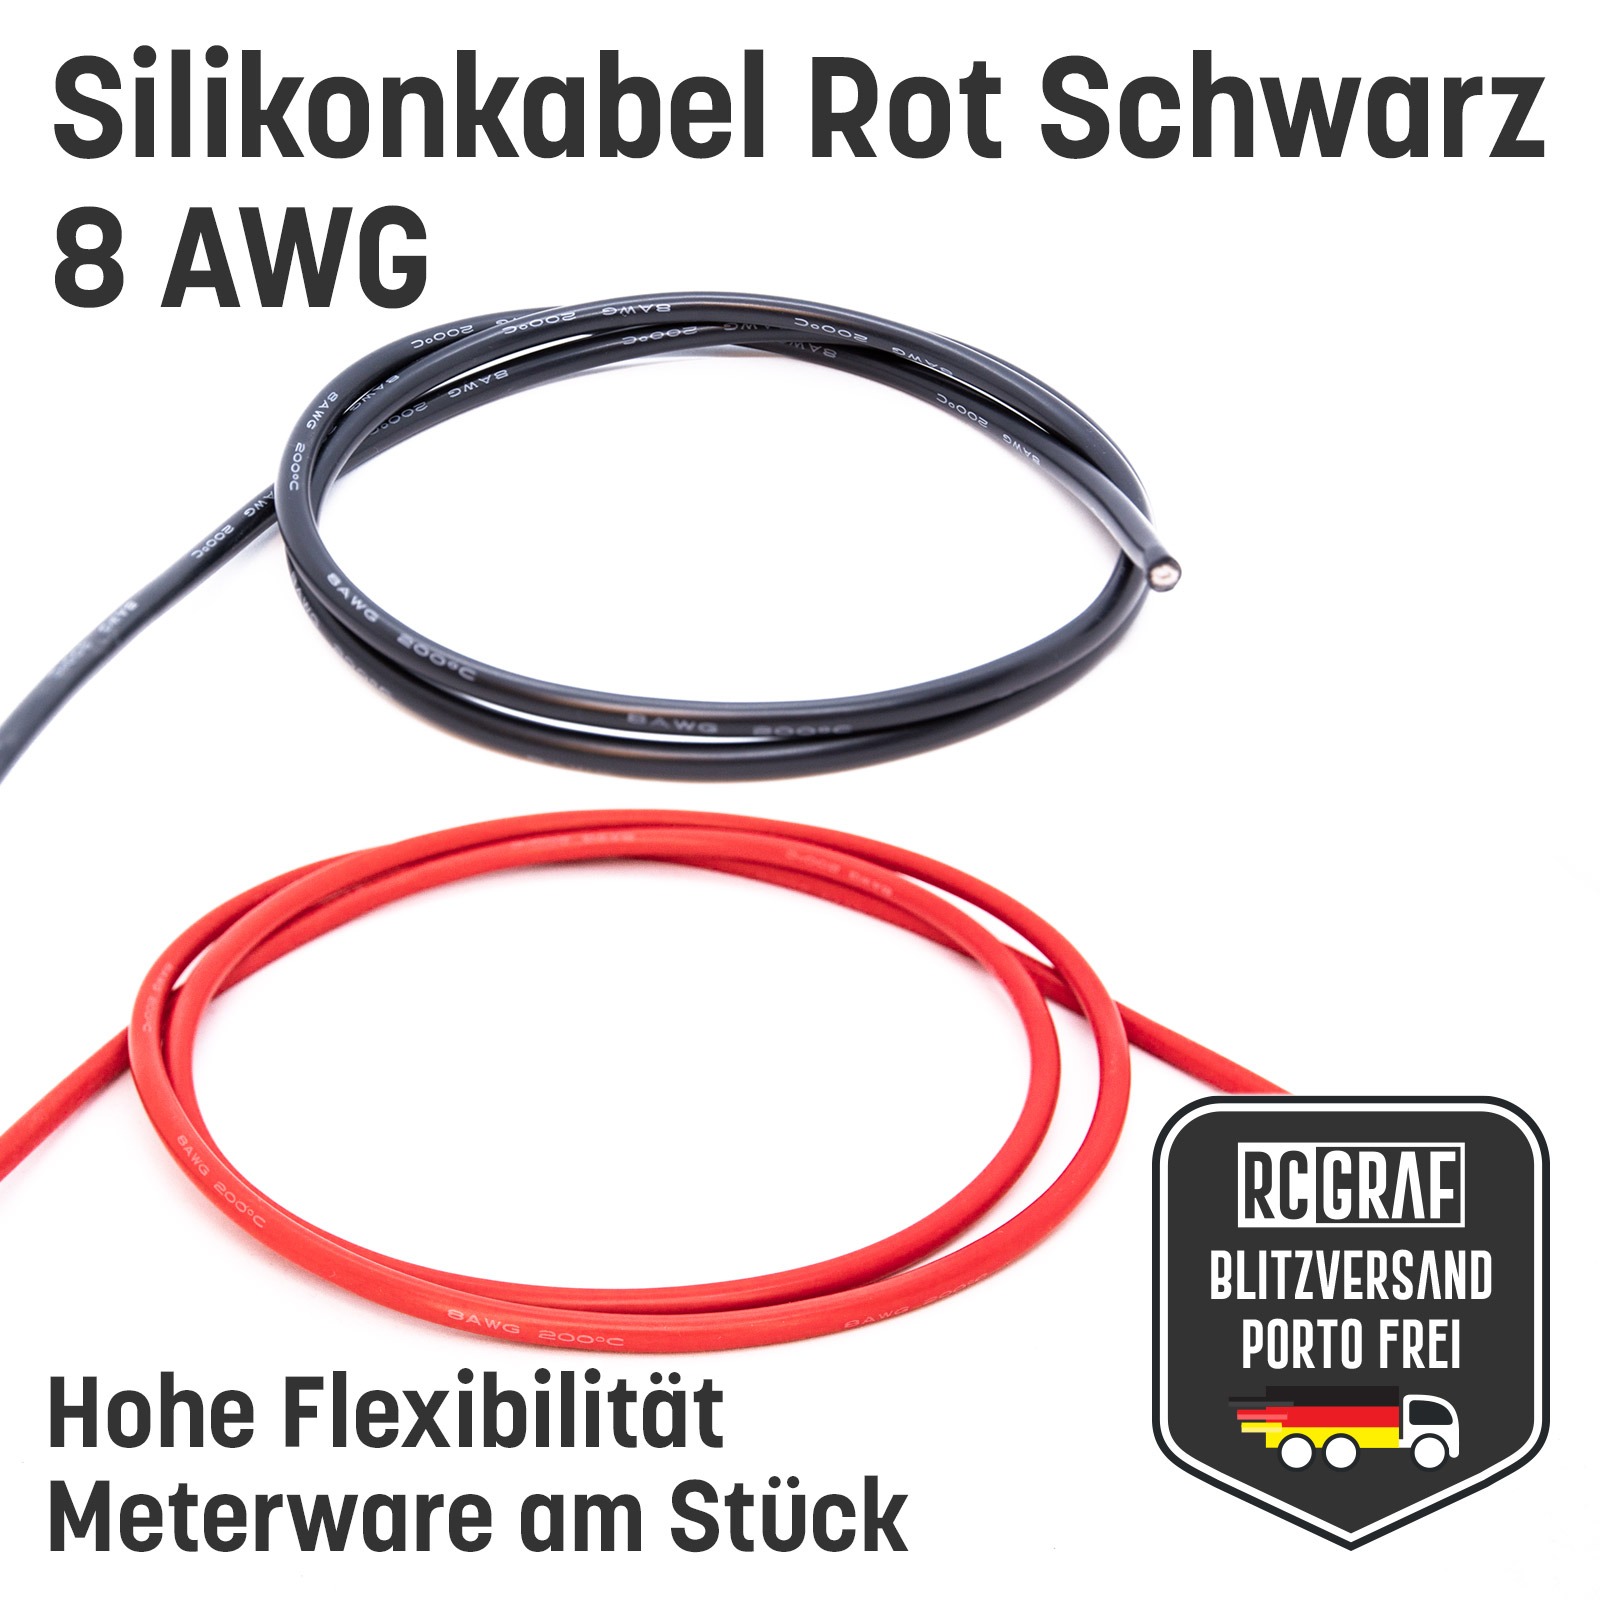 Silicone Cable 8 AWG High Flex Red Black Copper RC Cable